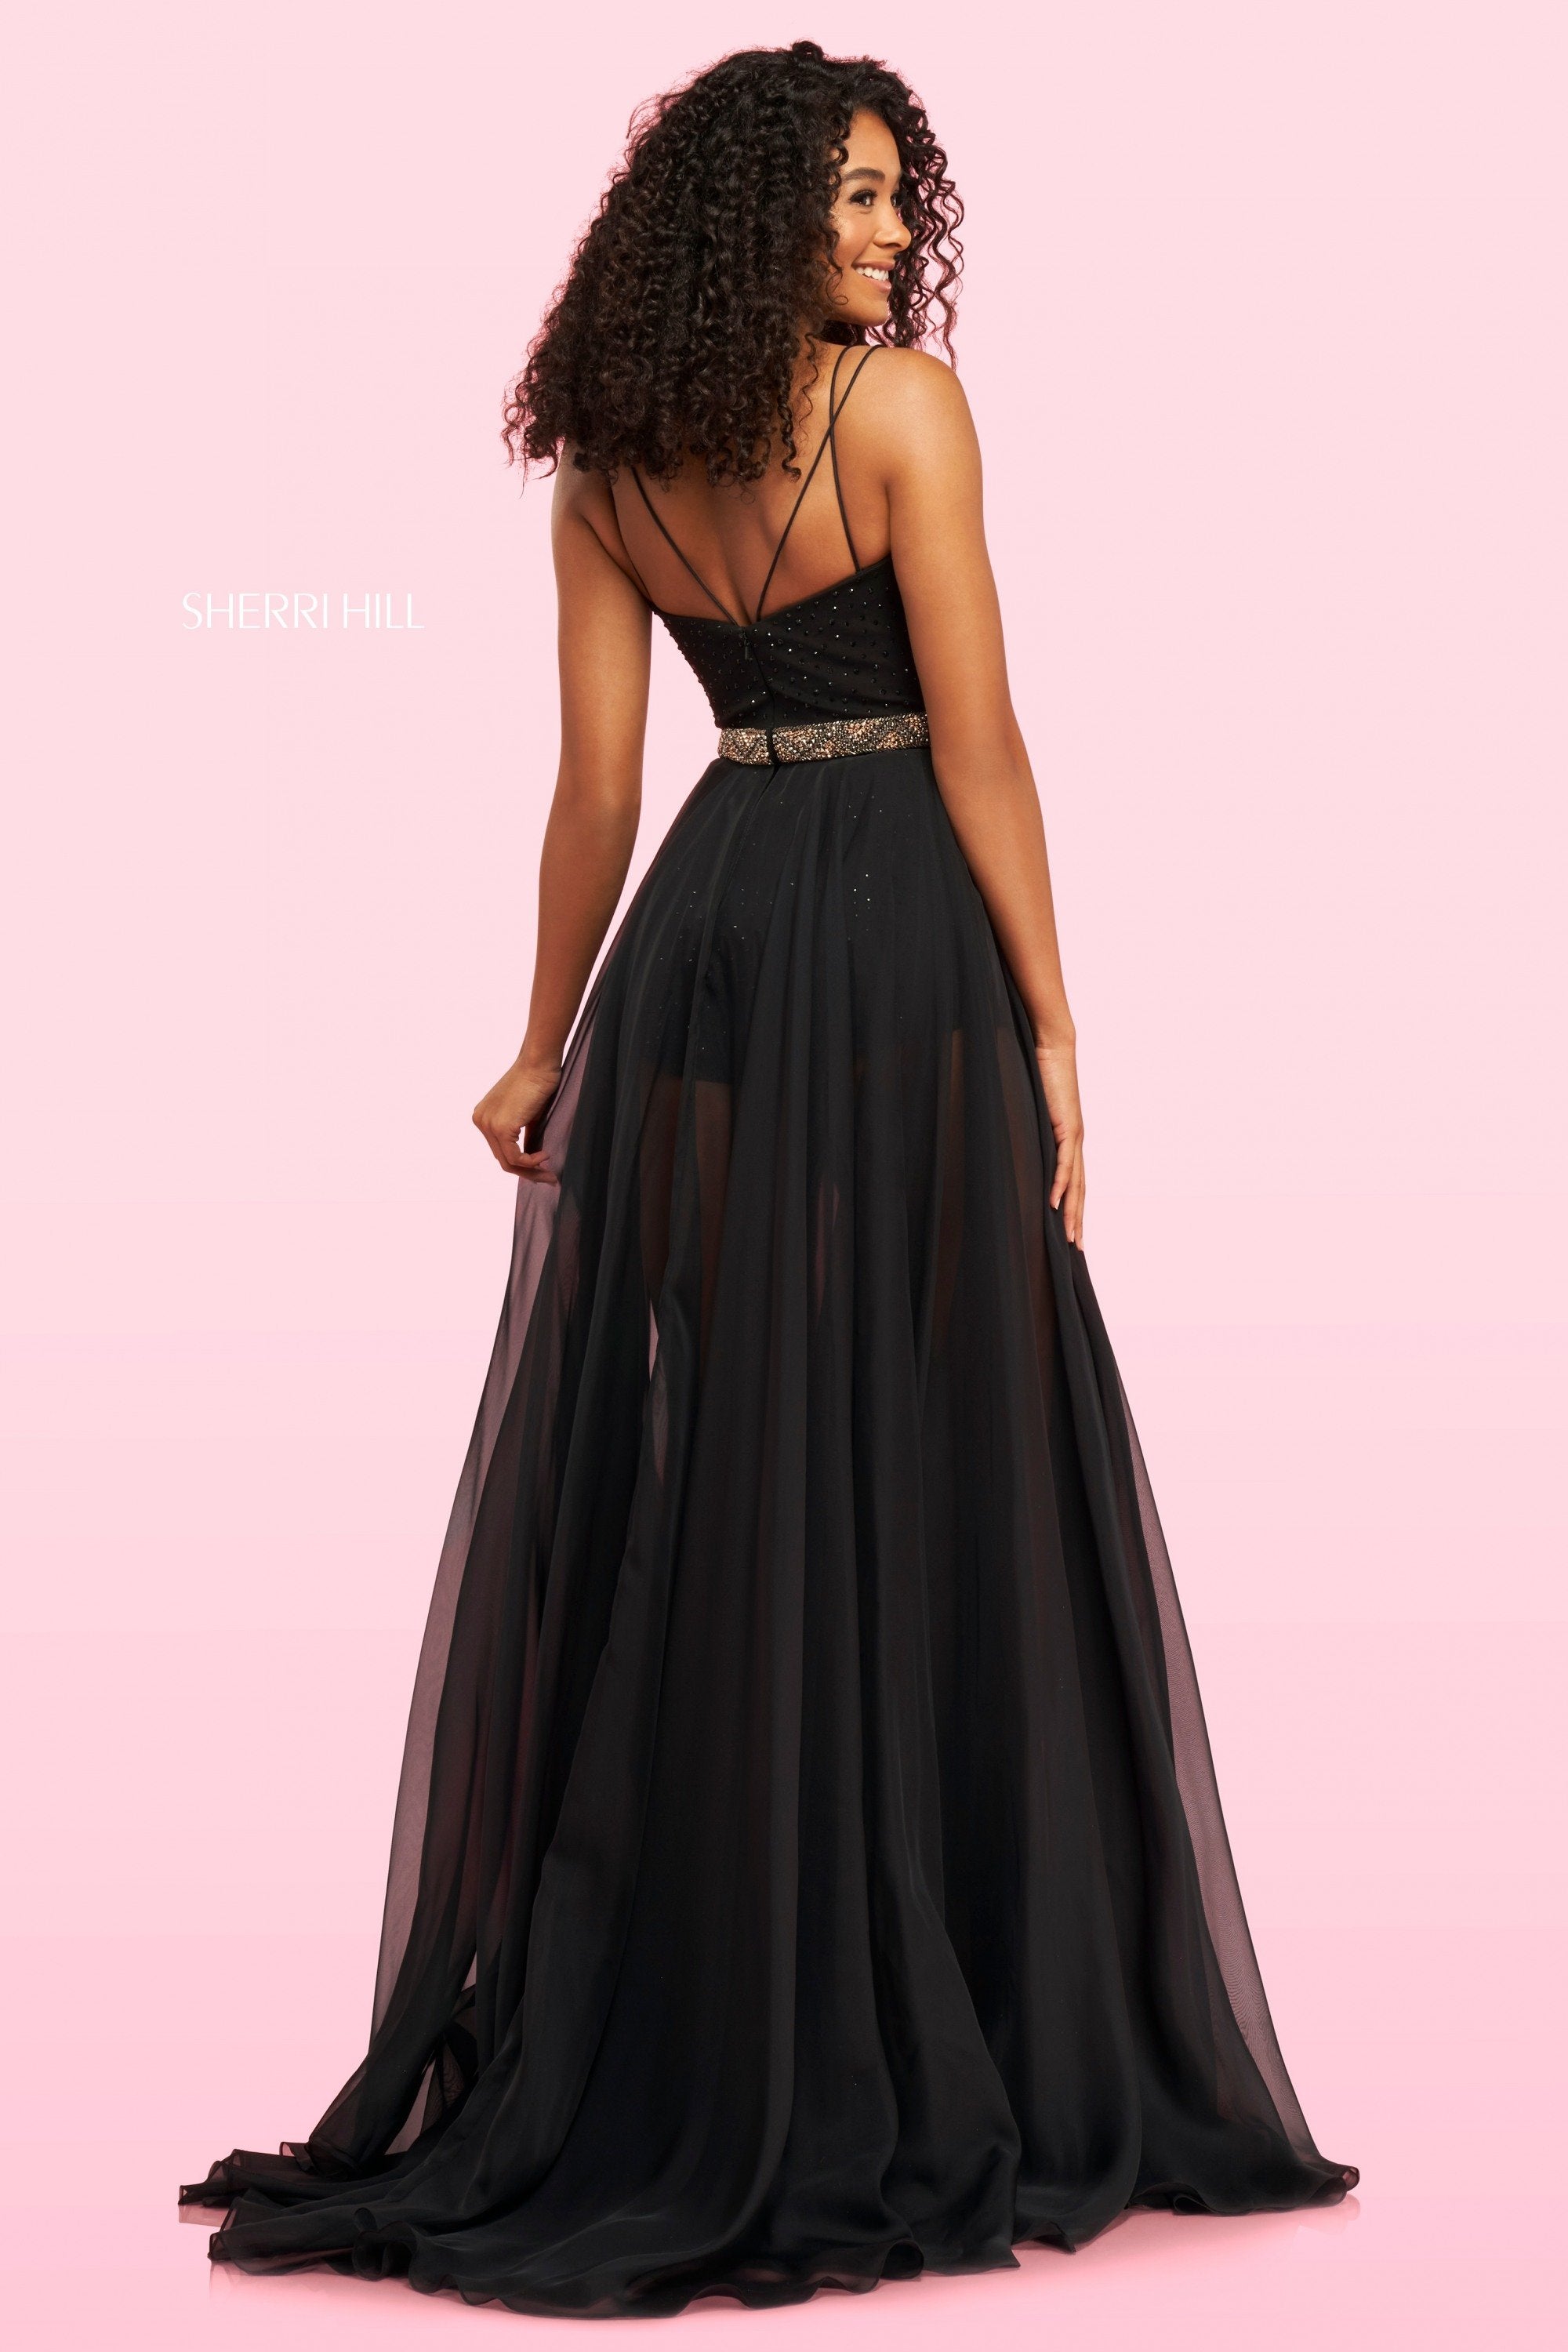 Sherri Hill 54238 dress images in these colors: Black.